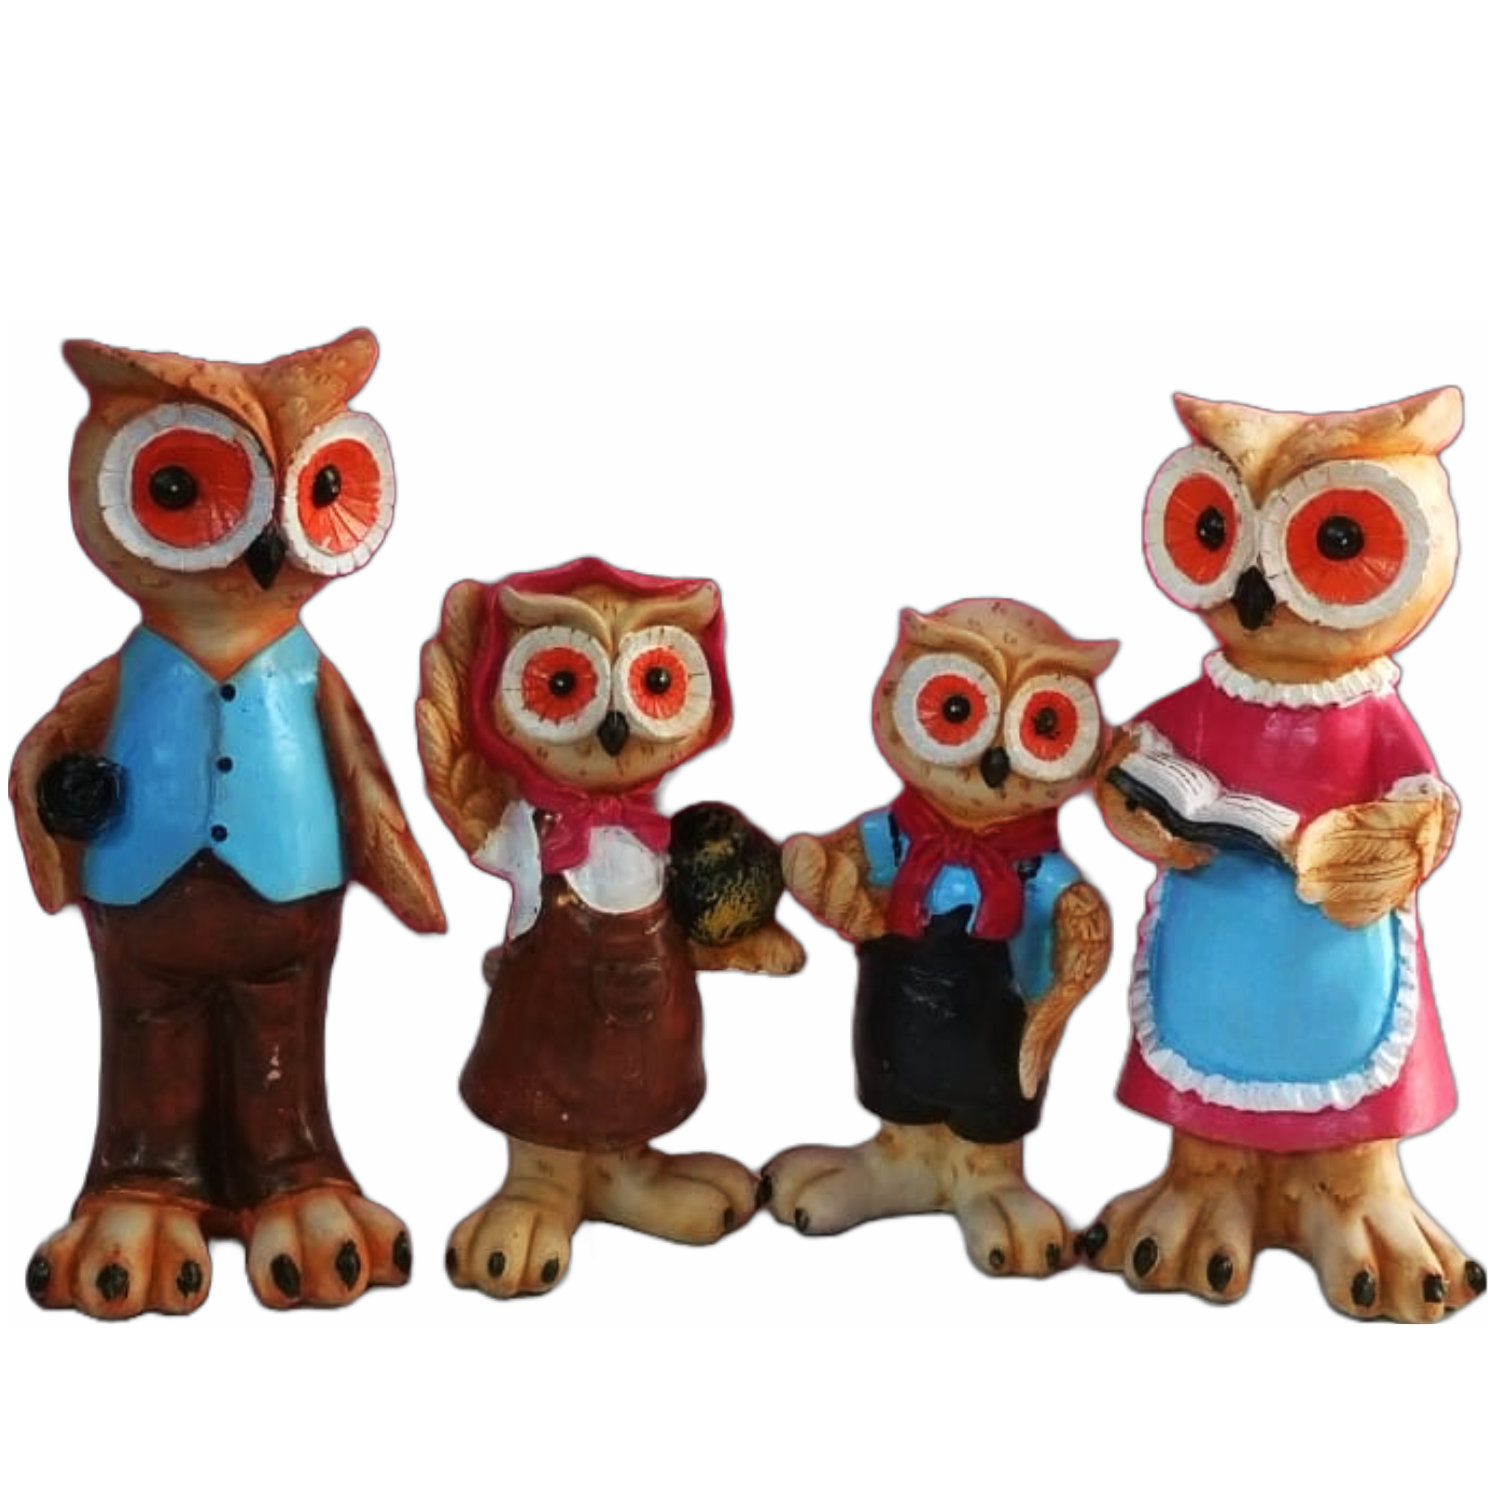 Statue ALiLA Owl's Family Showpiece for Home Decoration Interior Good Luck Statues, Set of 4 Statue